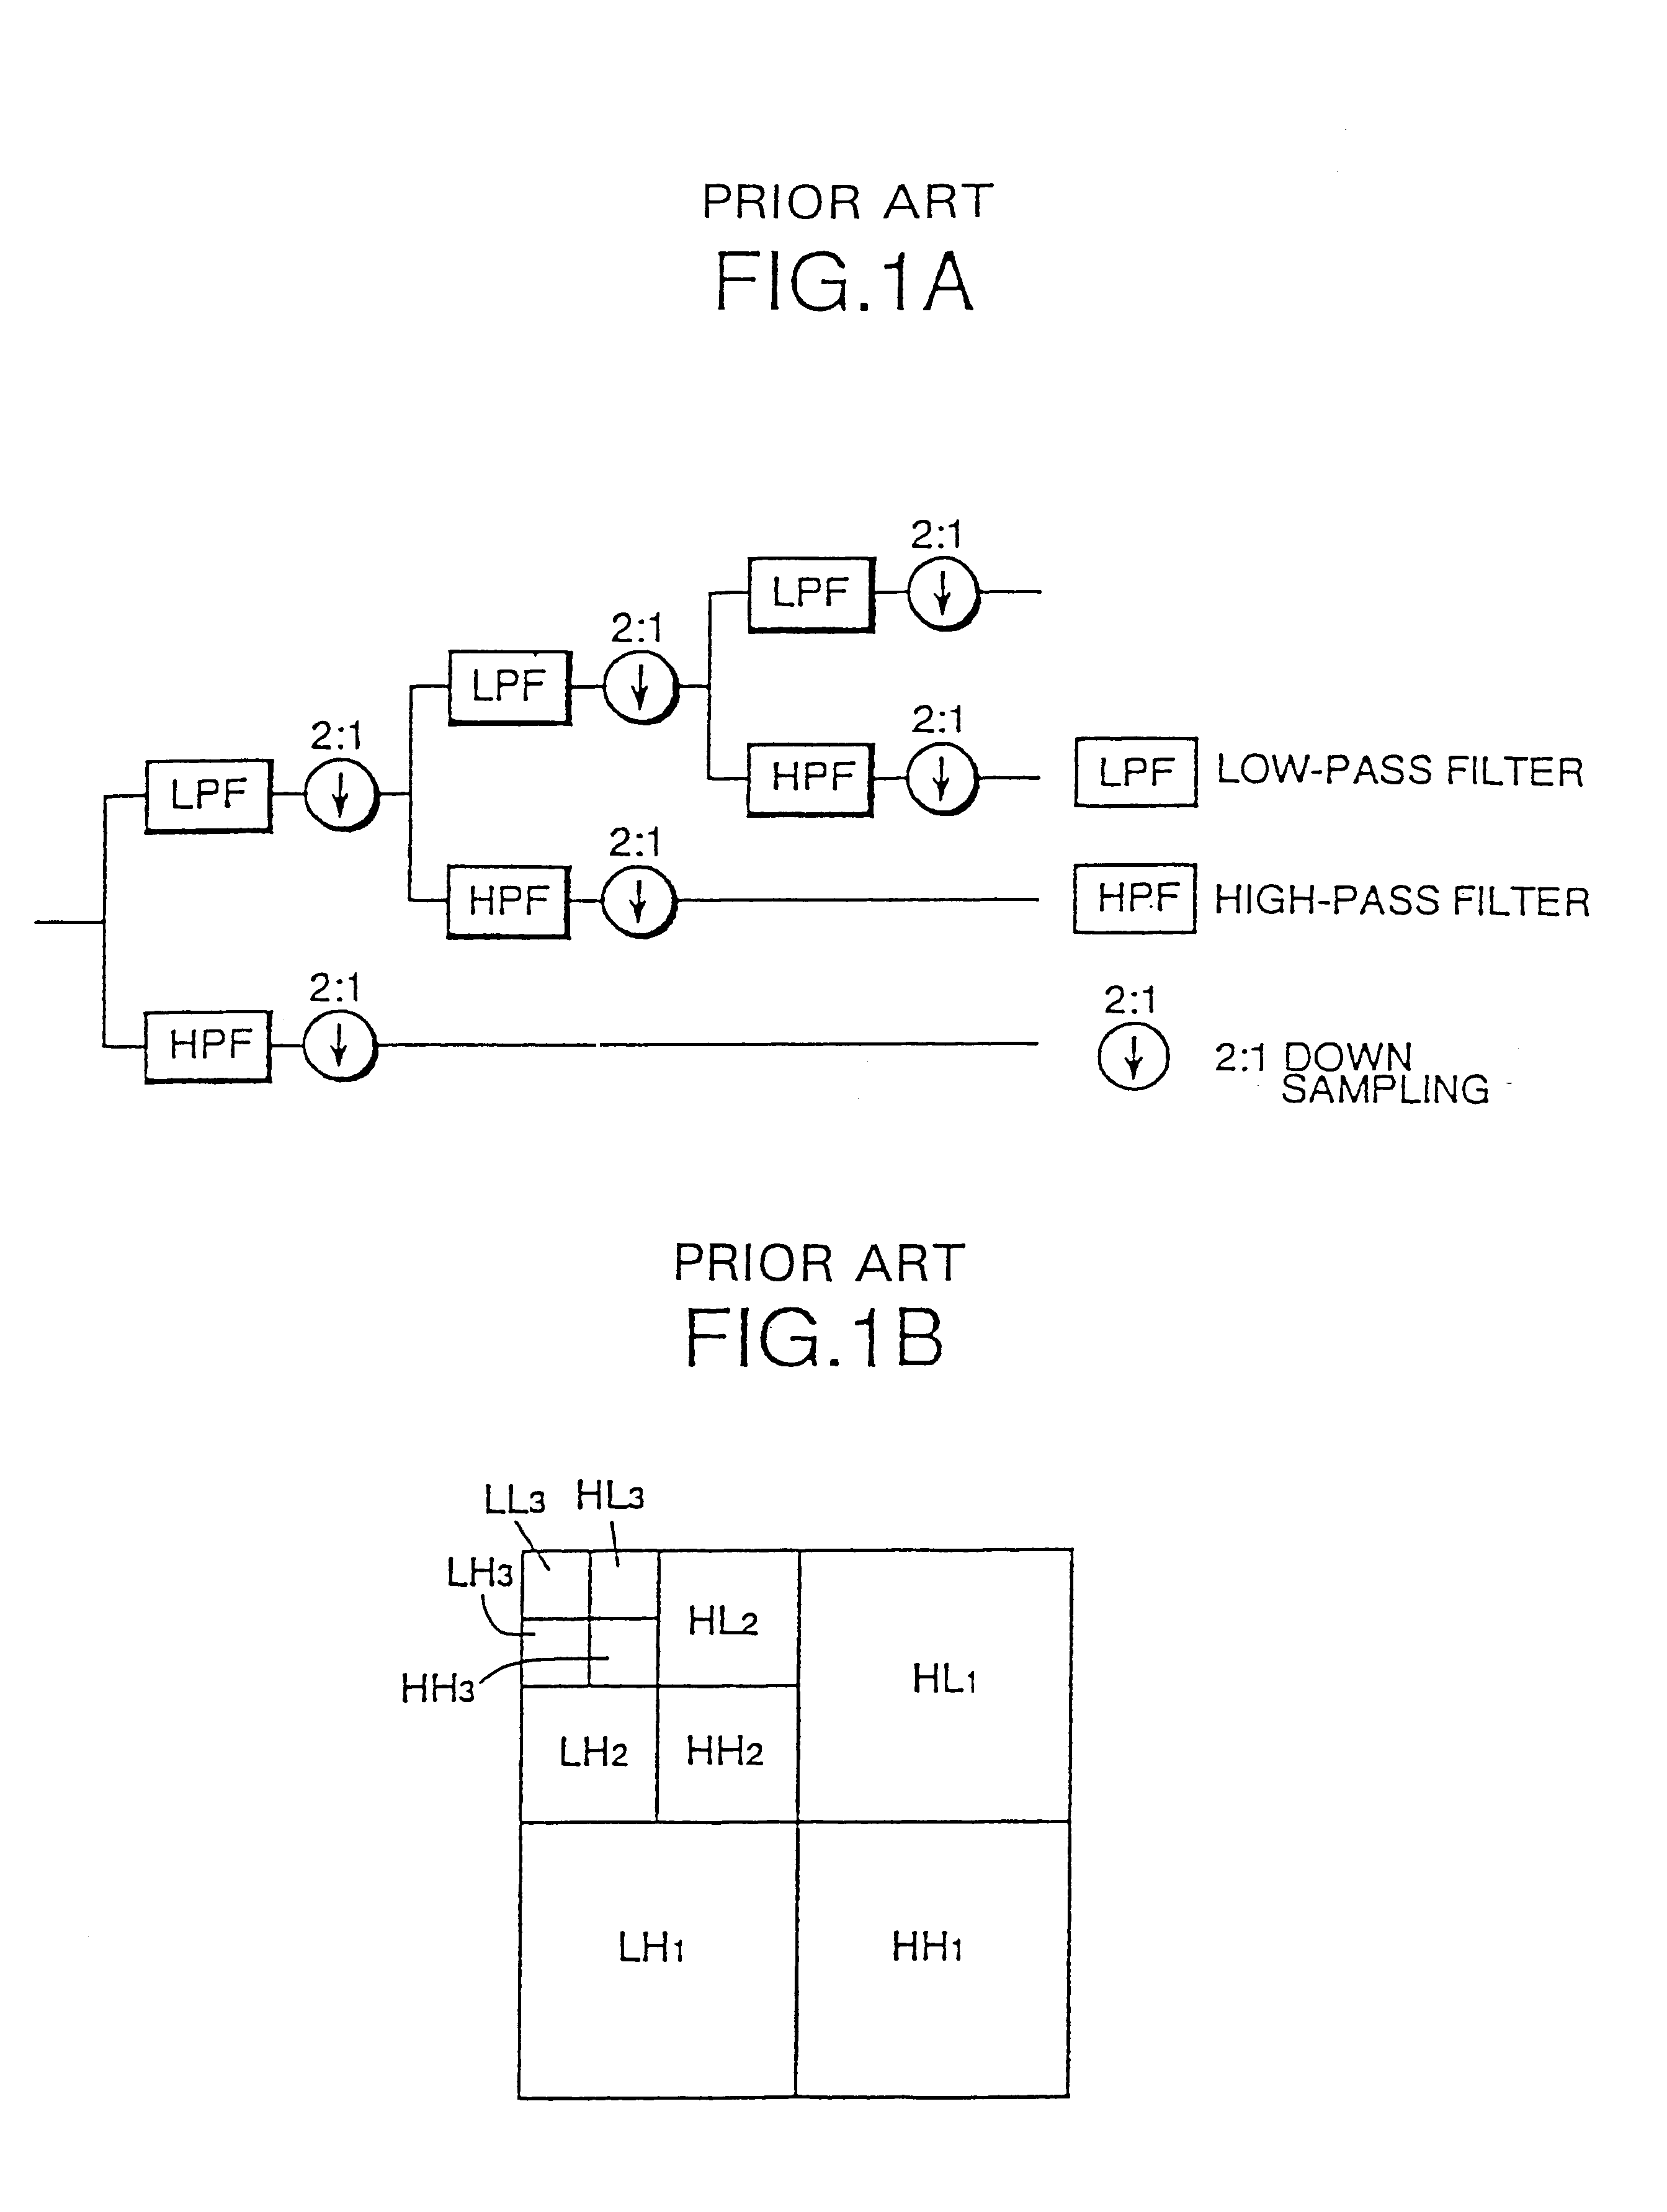 Image decoding device for decoding a hierarchically coded image